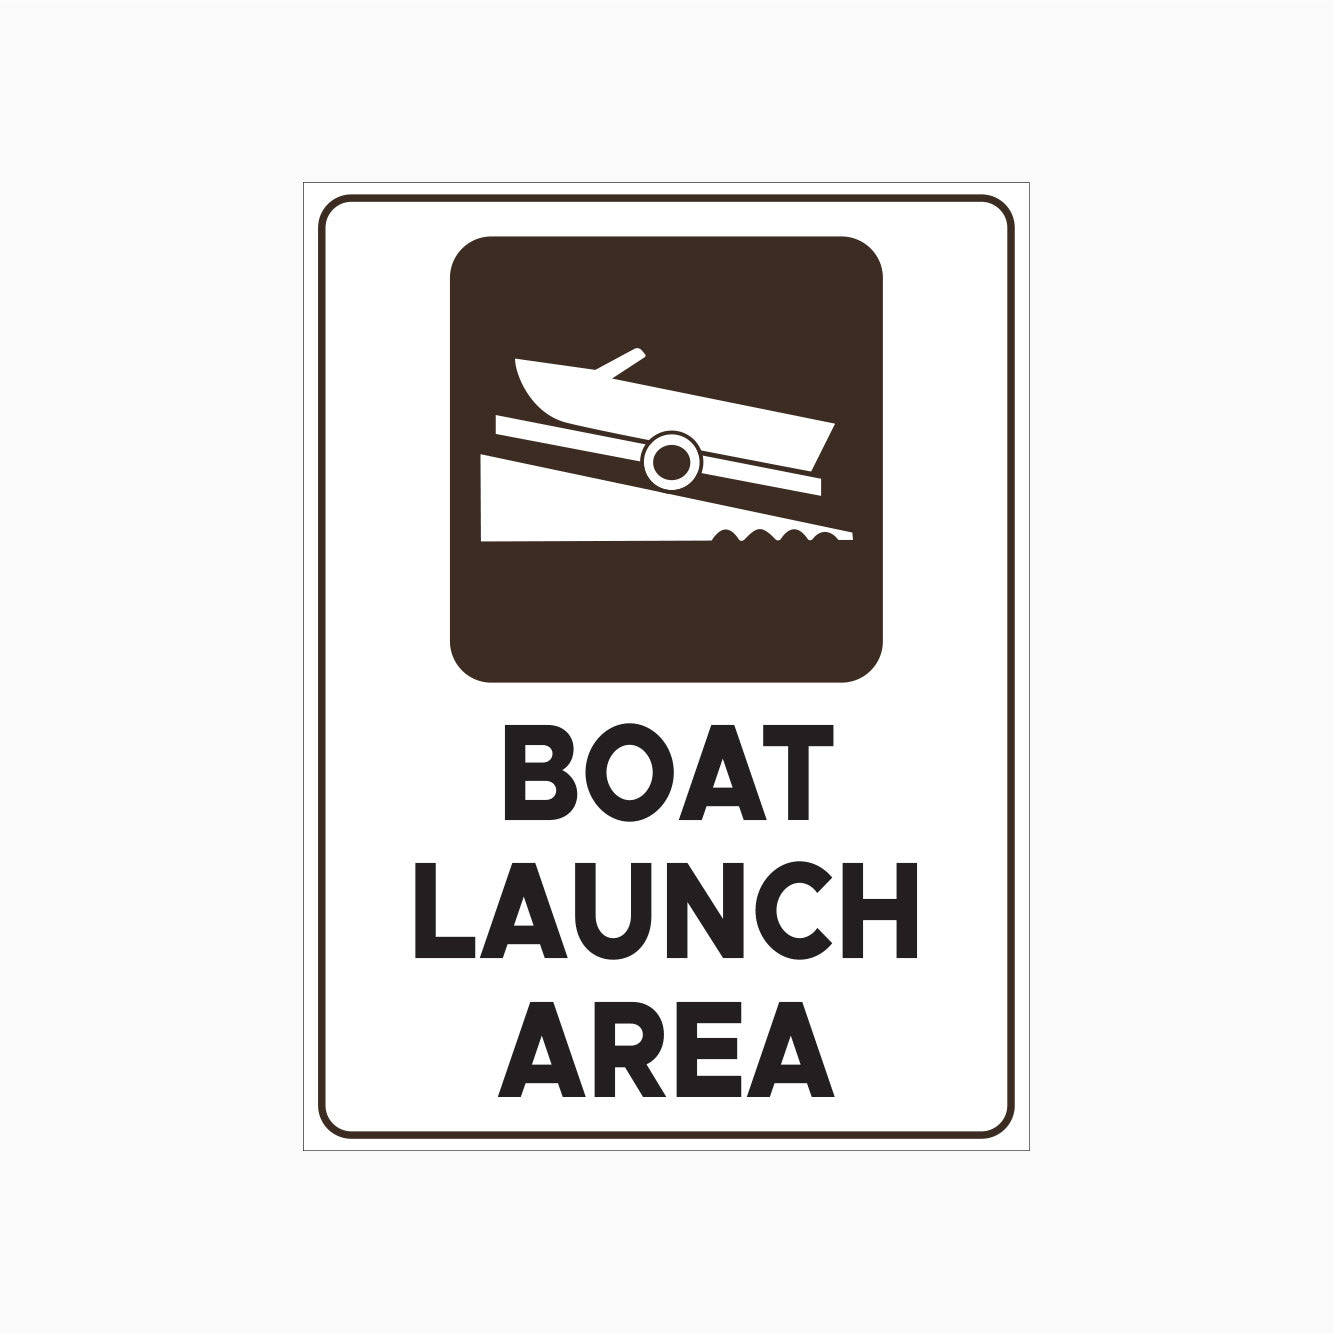 BOAT LAUNCH AREA SIGN - WATER SAFETY SIGNS